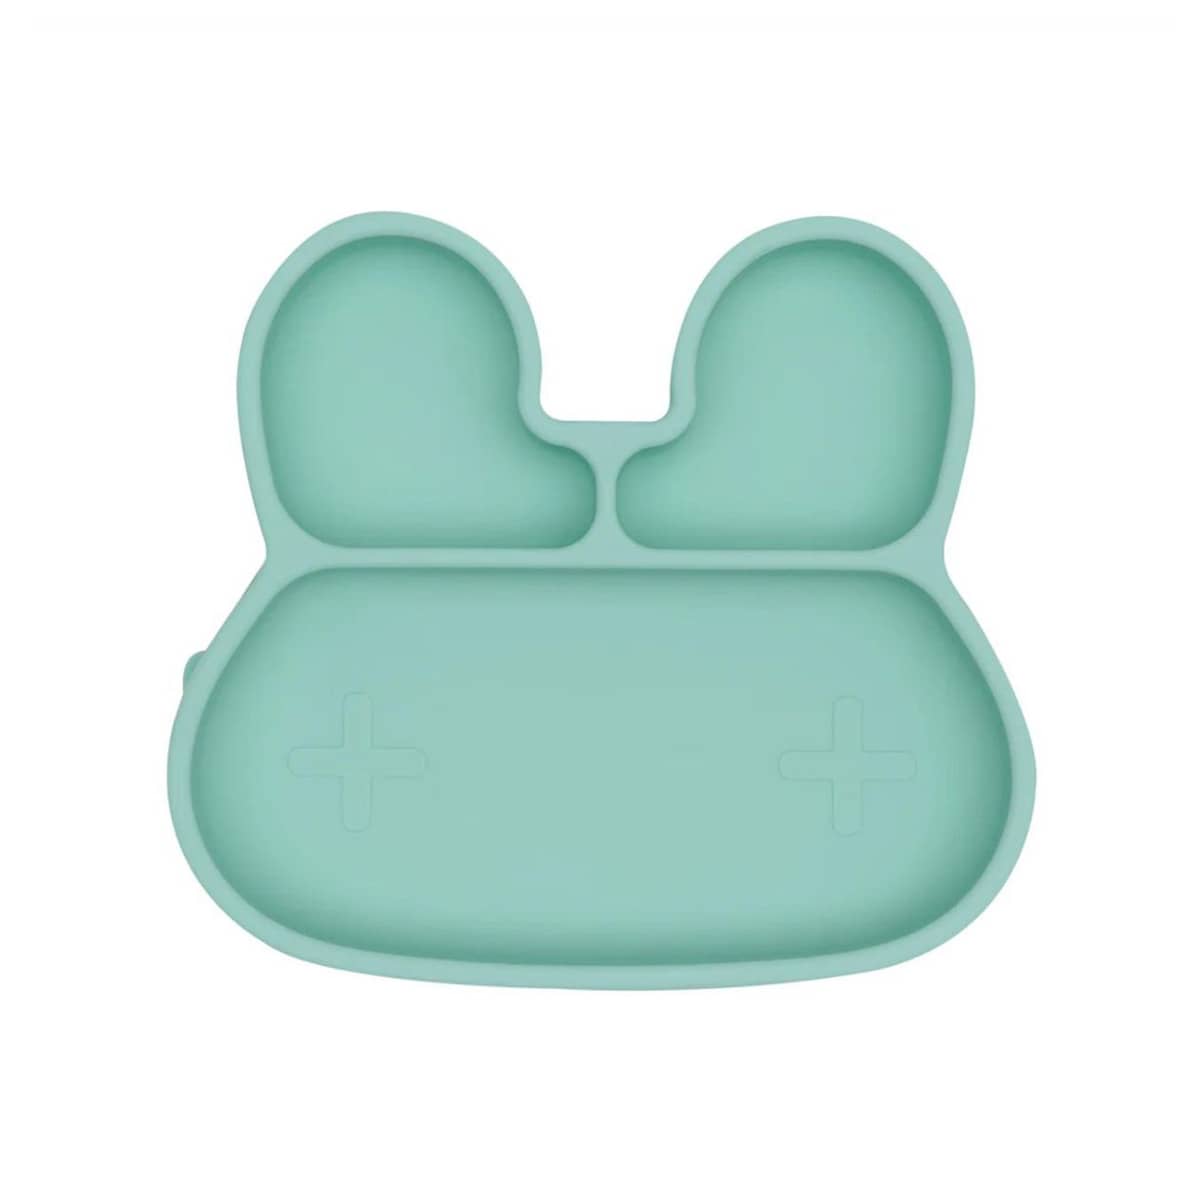 We Might Be Tiny Stickie Silicone Suction Plate - Bunny - Mint